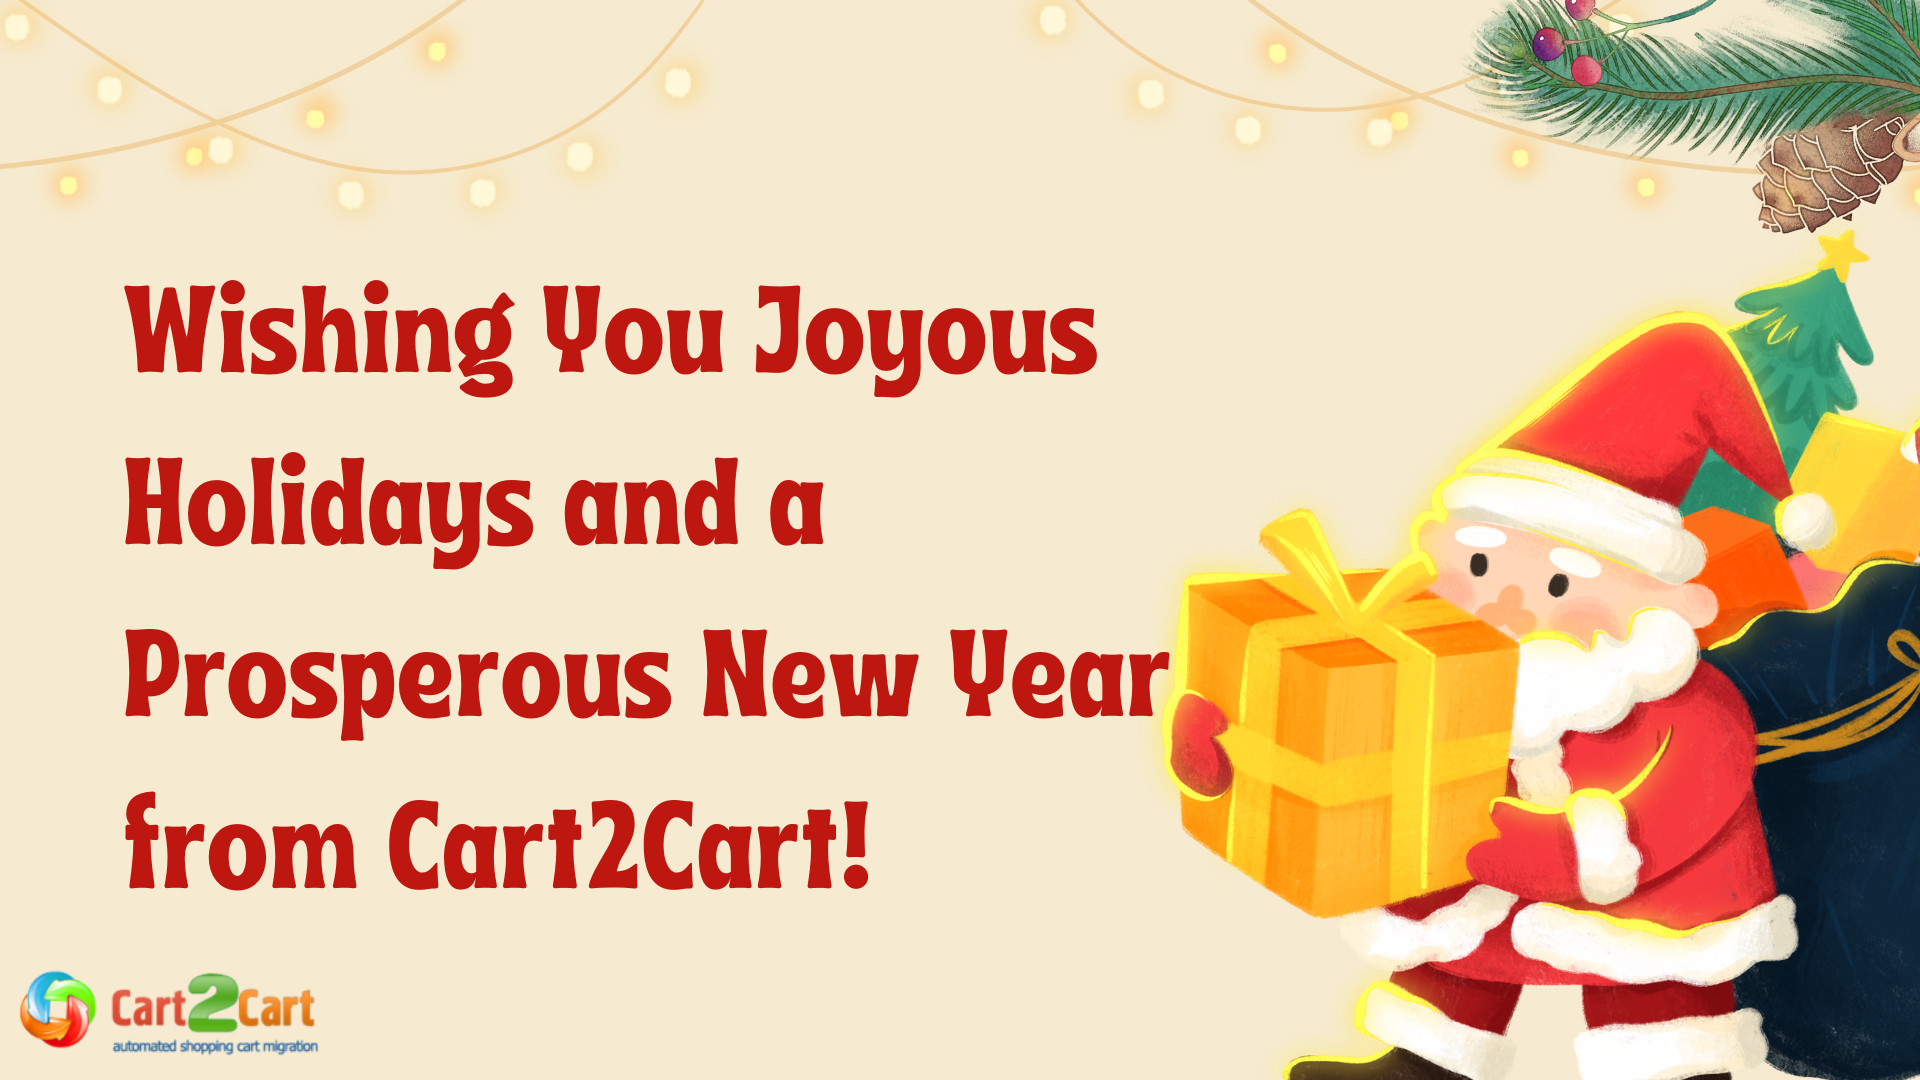 Wishing You Joyous Holidays and a Prosperous New Year from Cart2Cart!